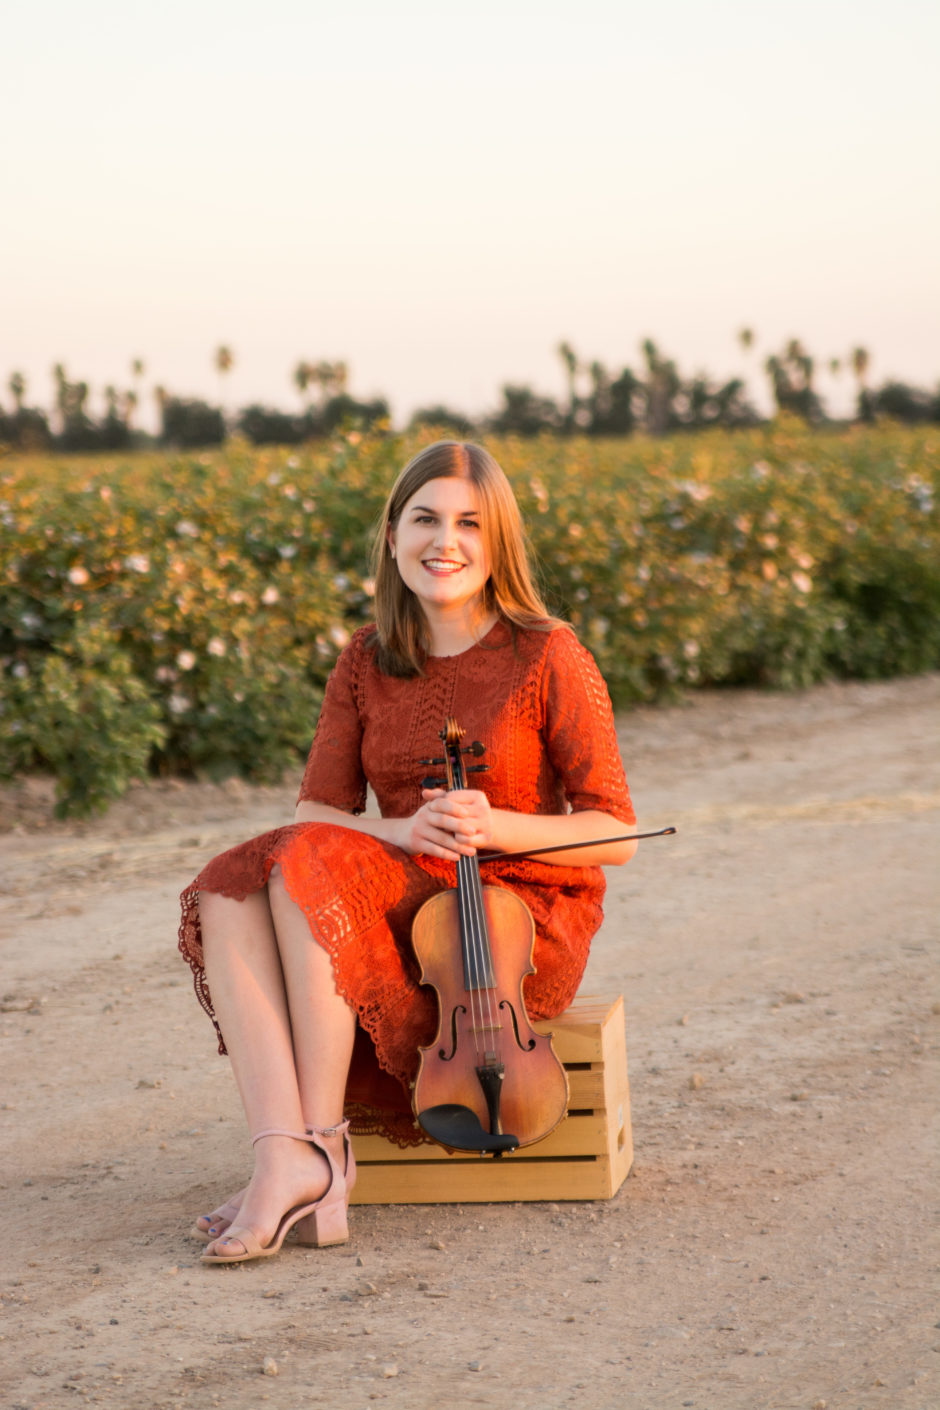 High school senior girl photographed with violin in cotton field in Arizona by Melissa Maxwell of Jubilee Family Photography in Gilbert, AZ.